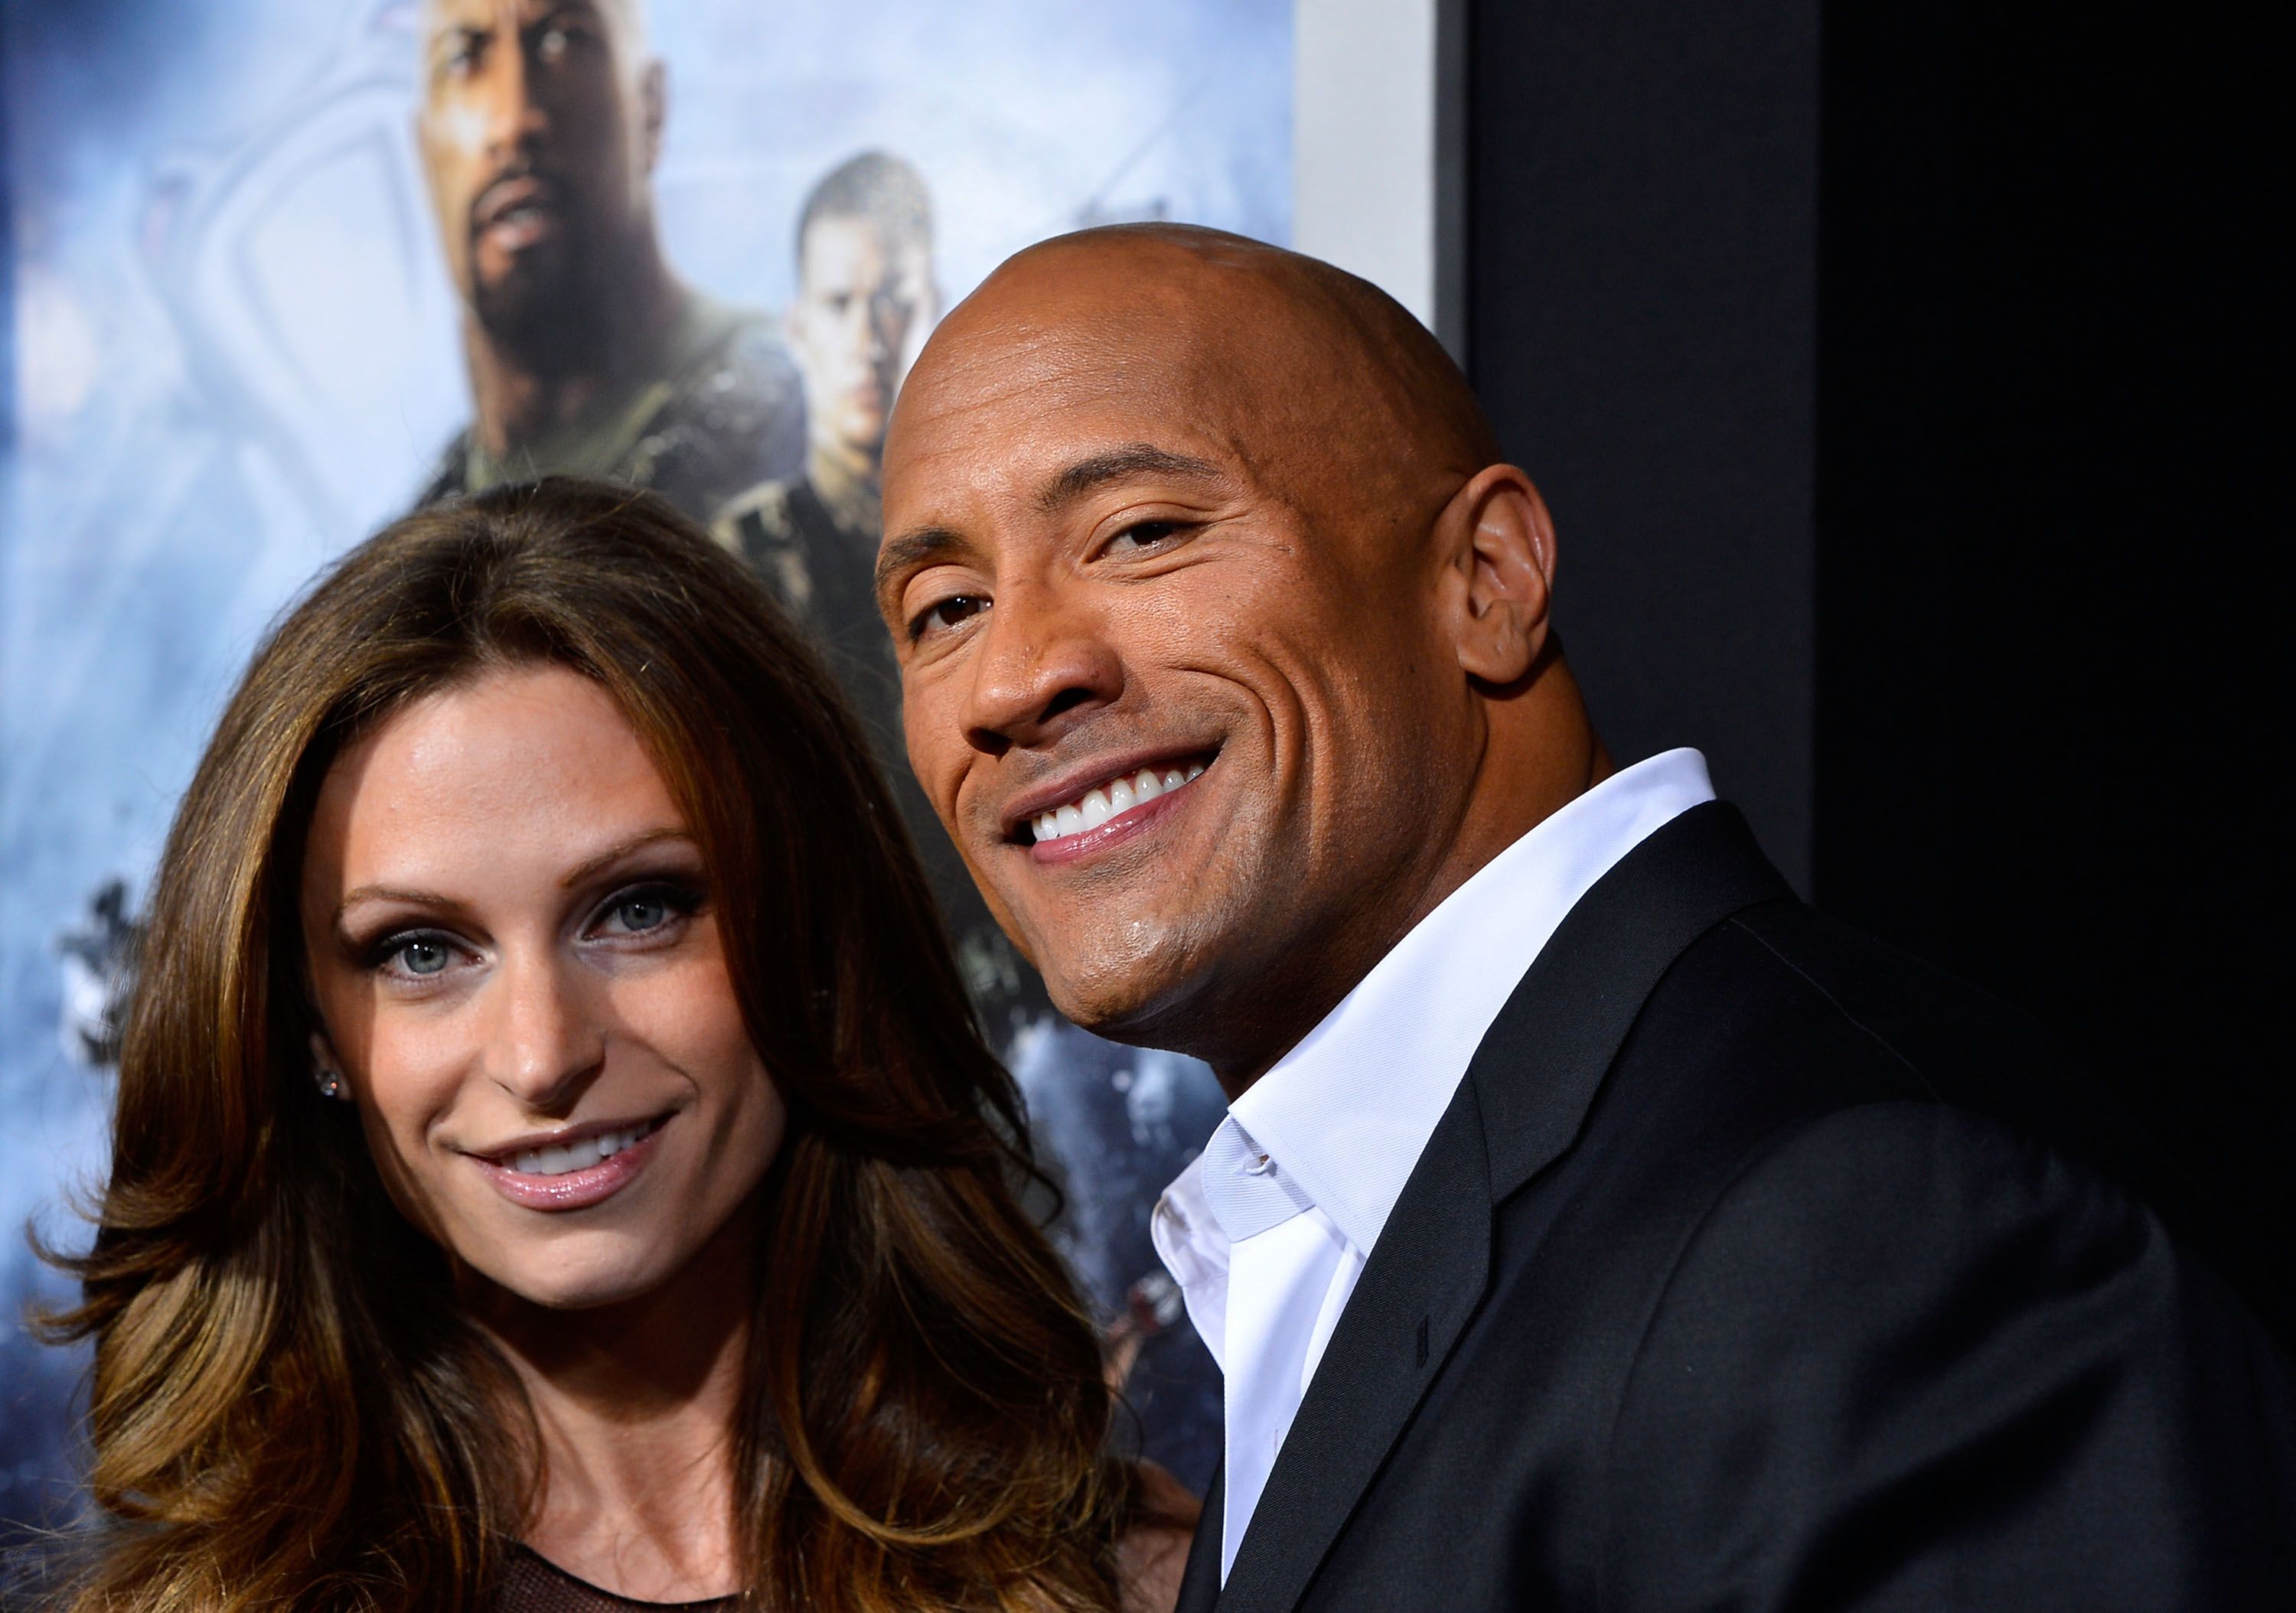 Dwayne Johnson and Lauren Hashian at the Premiere of Paramount Pictures' "G.I. Joe: Retaliation" at TCL Chinese Theatre on March 28, 2013 in Hollywood, California | Photo: Getty Images